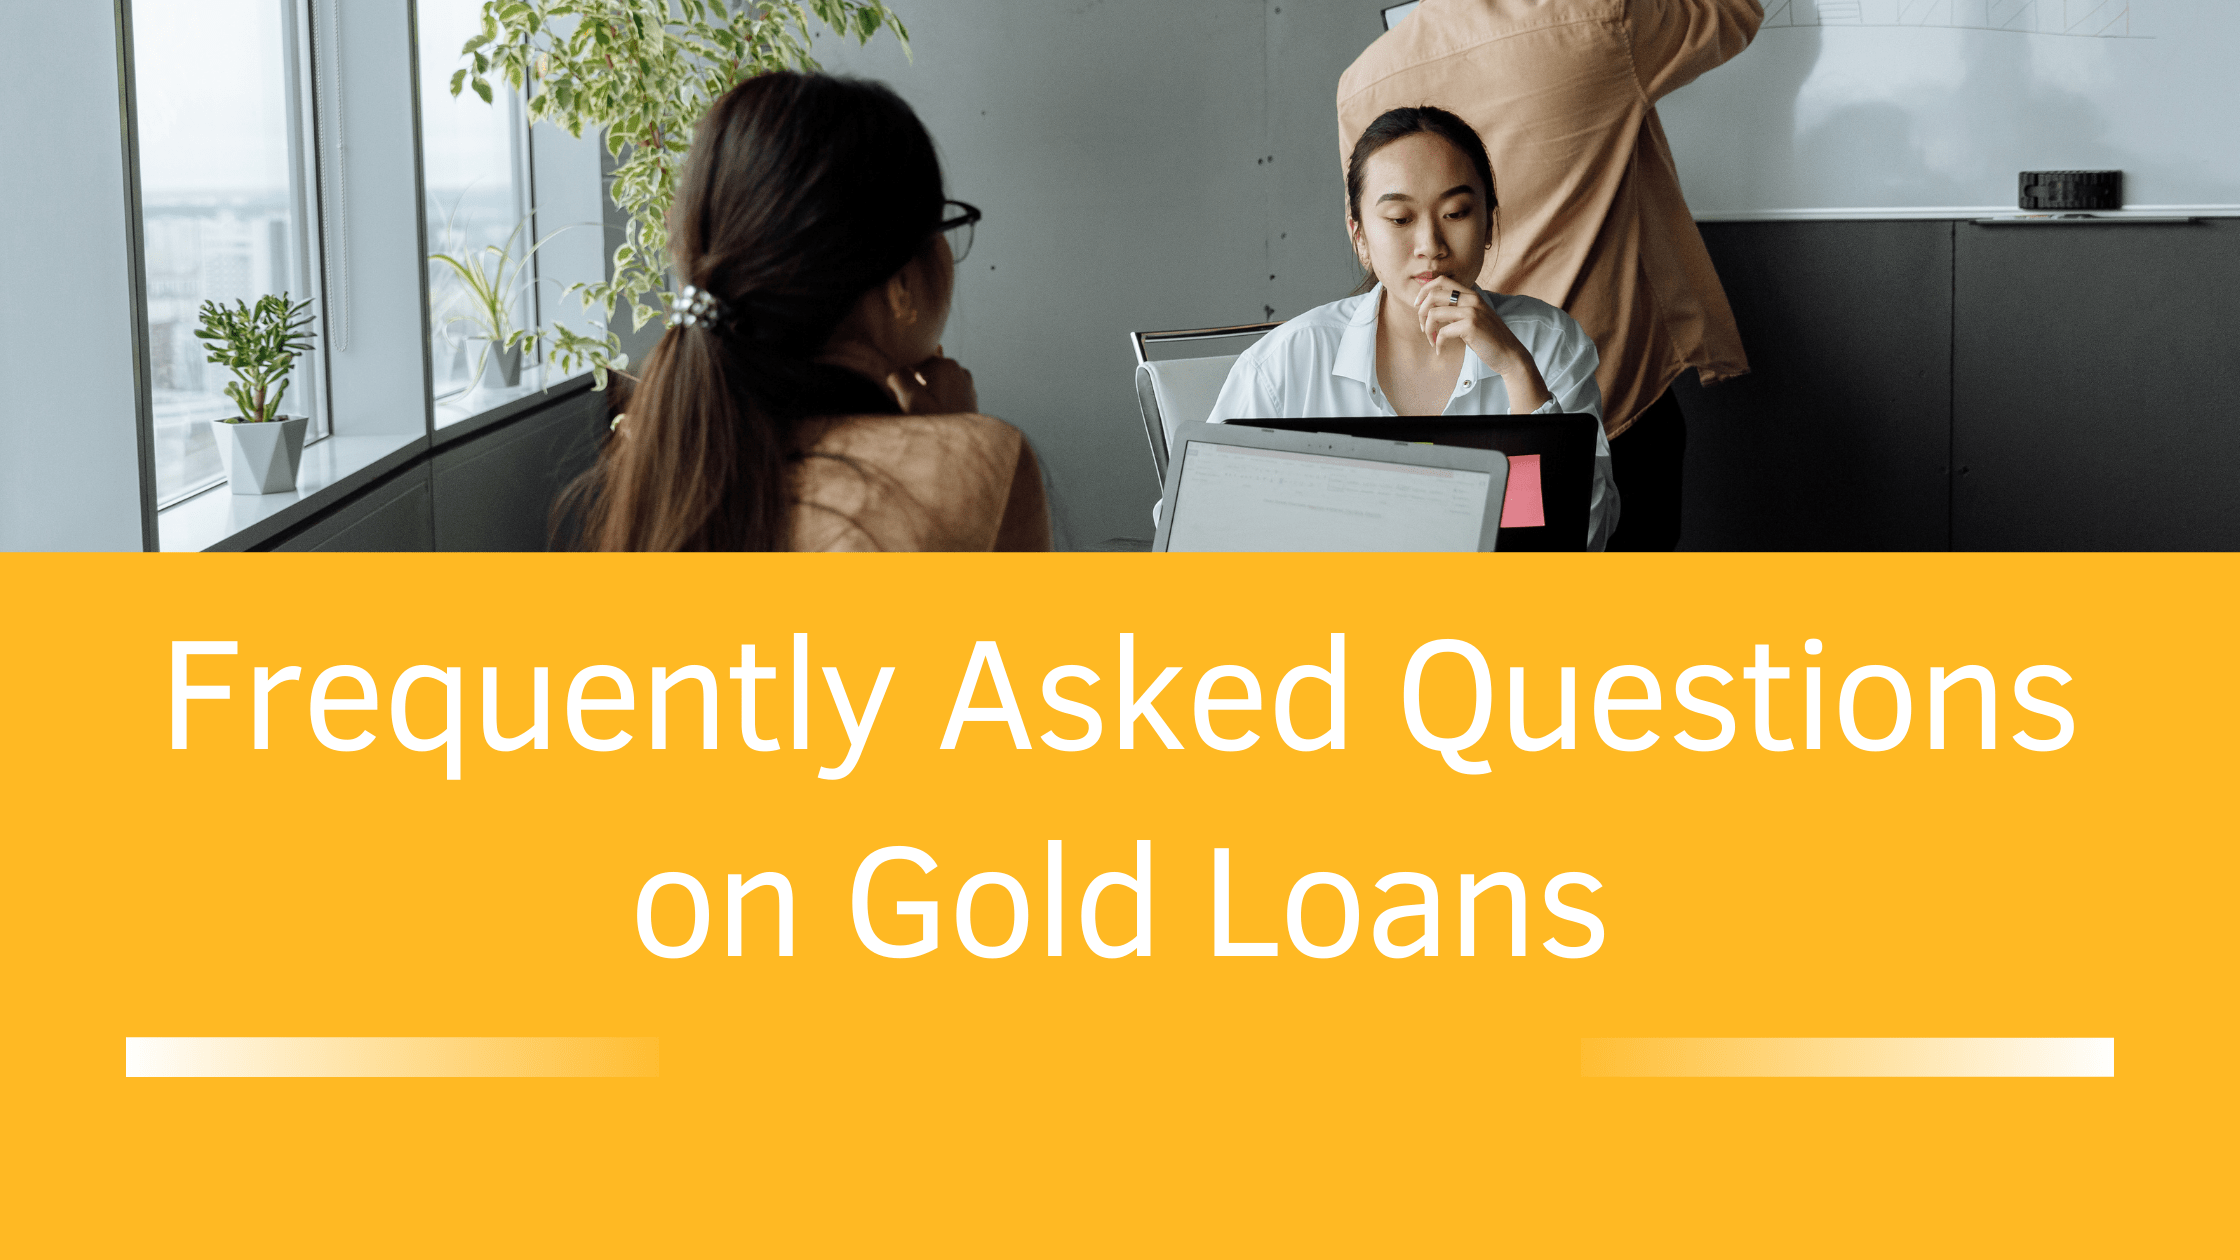 Questions on Gold Loans